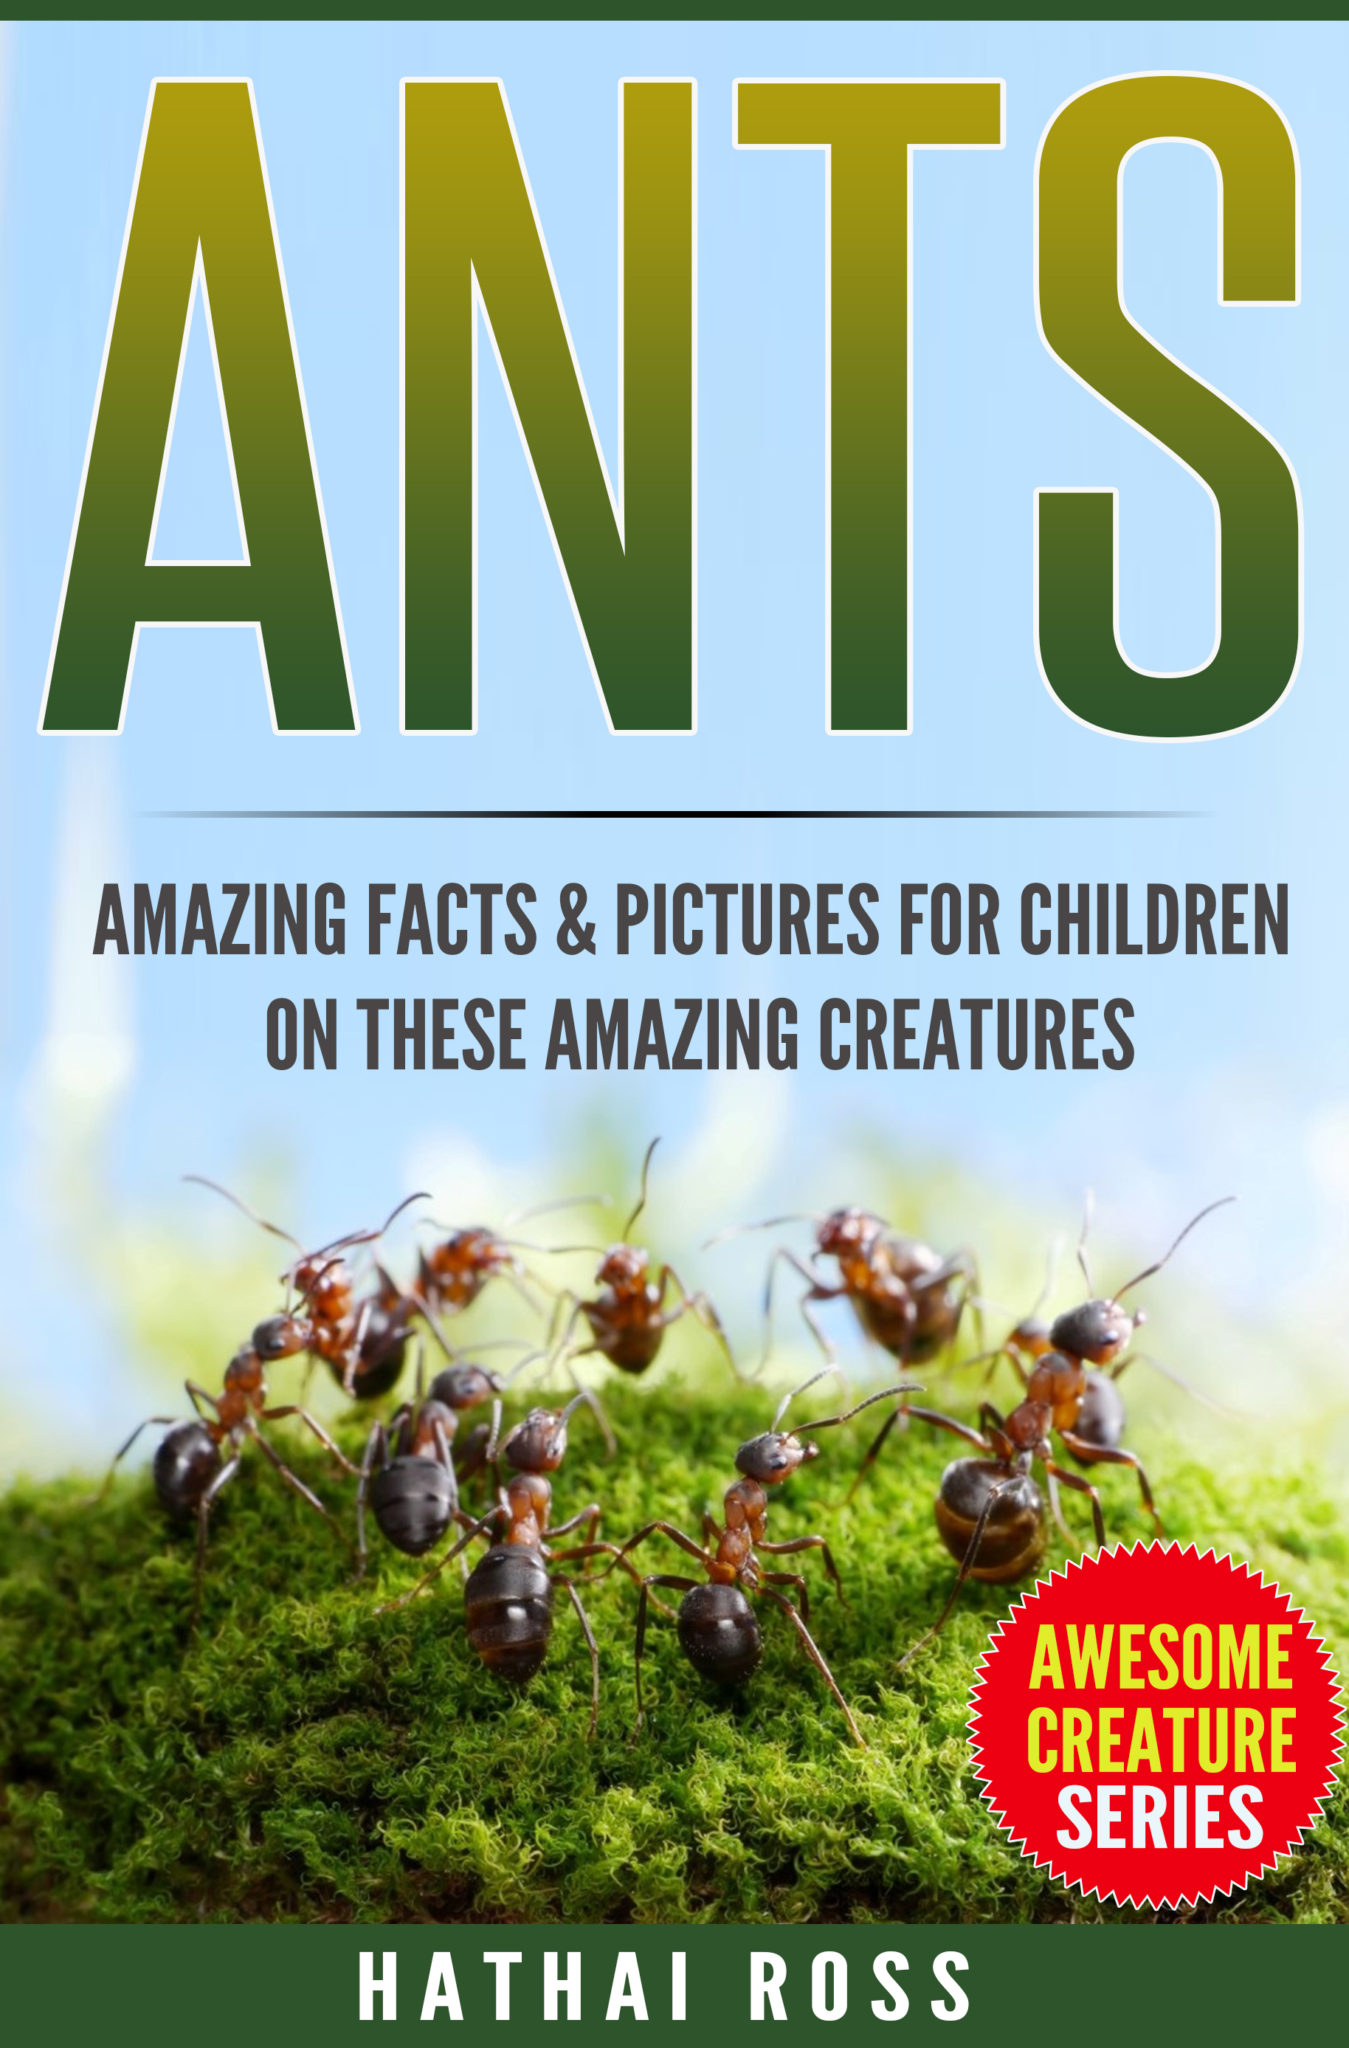 FREE: Ants: Amazing Facts & Pictures for Children on These Amazing Creatures by Hathai Ross